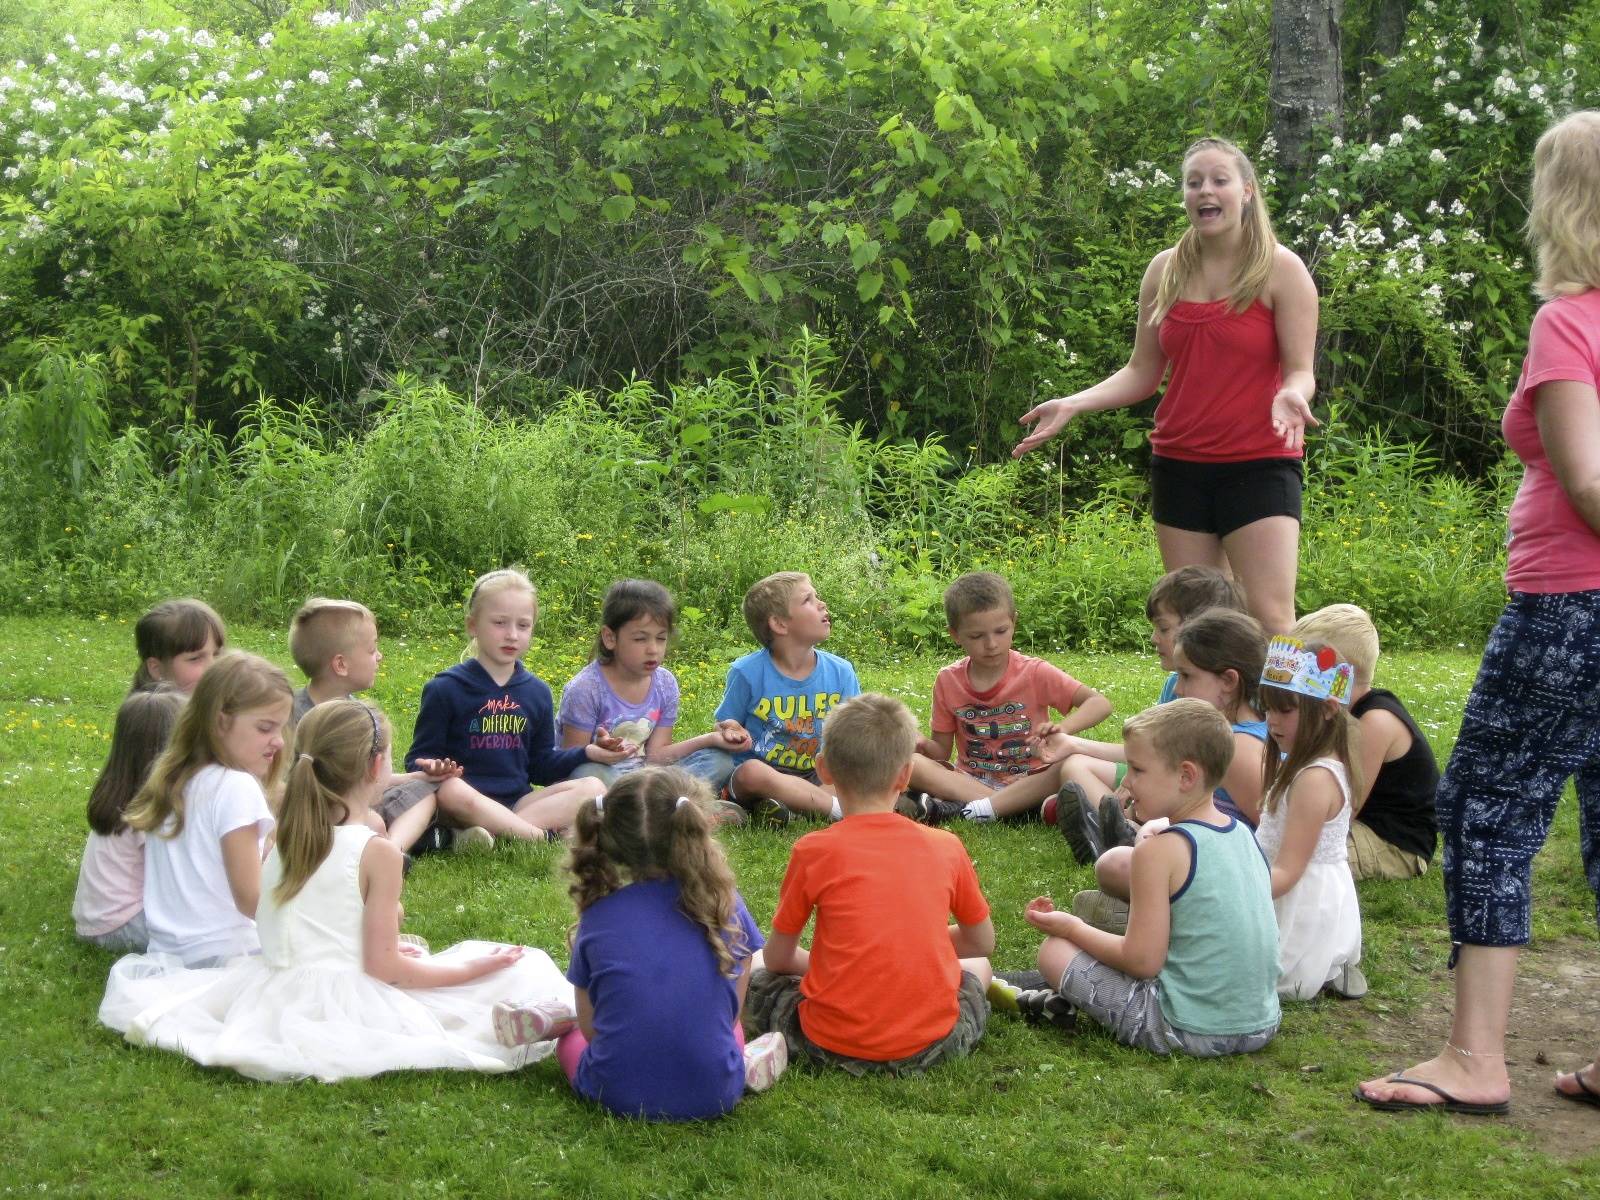 Students play a game around a "campfire".